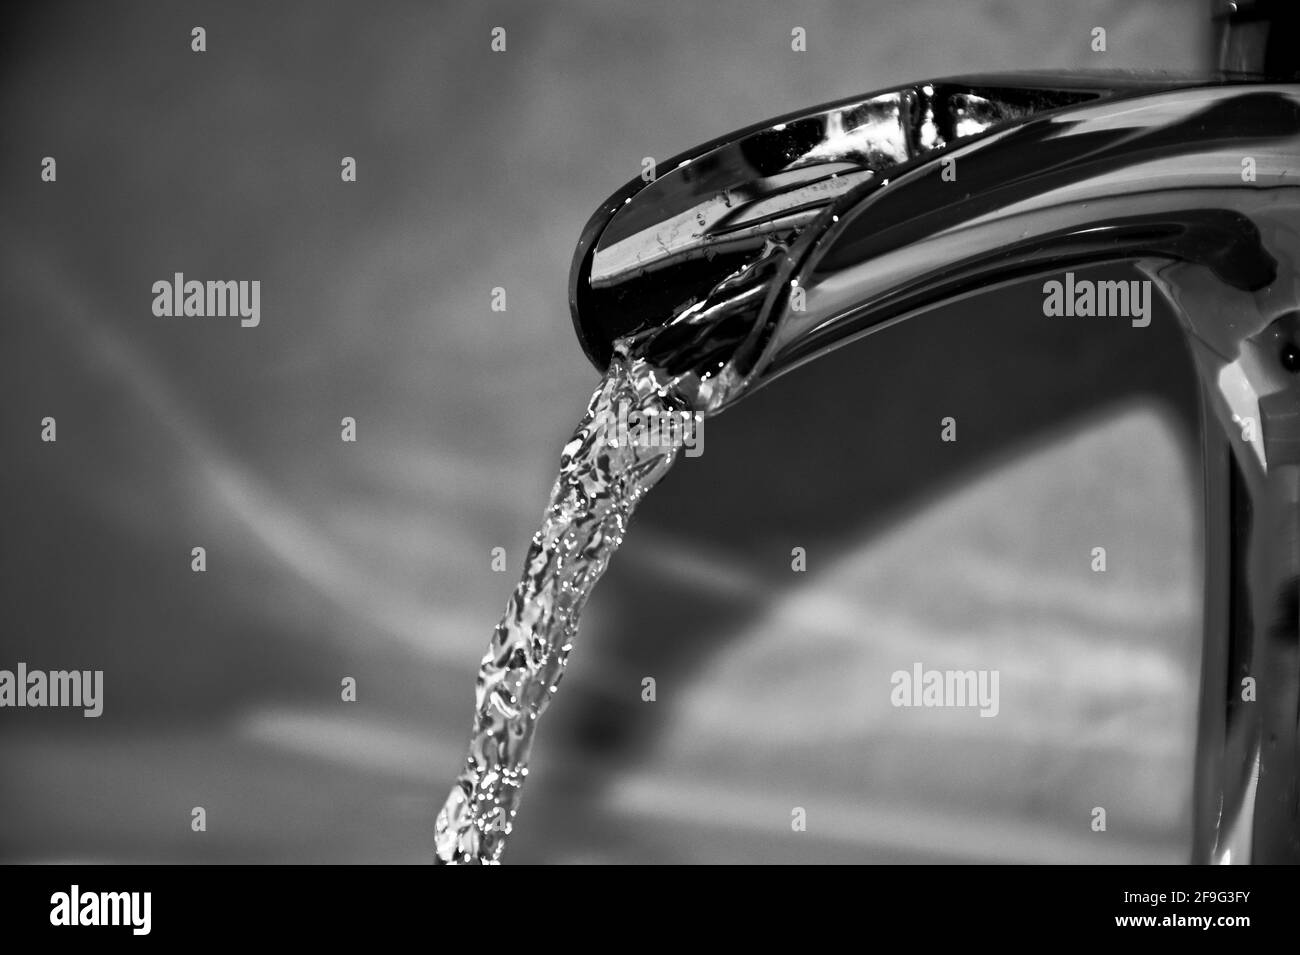 Waterfall style tap with flowing water in black & white Stock Photo